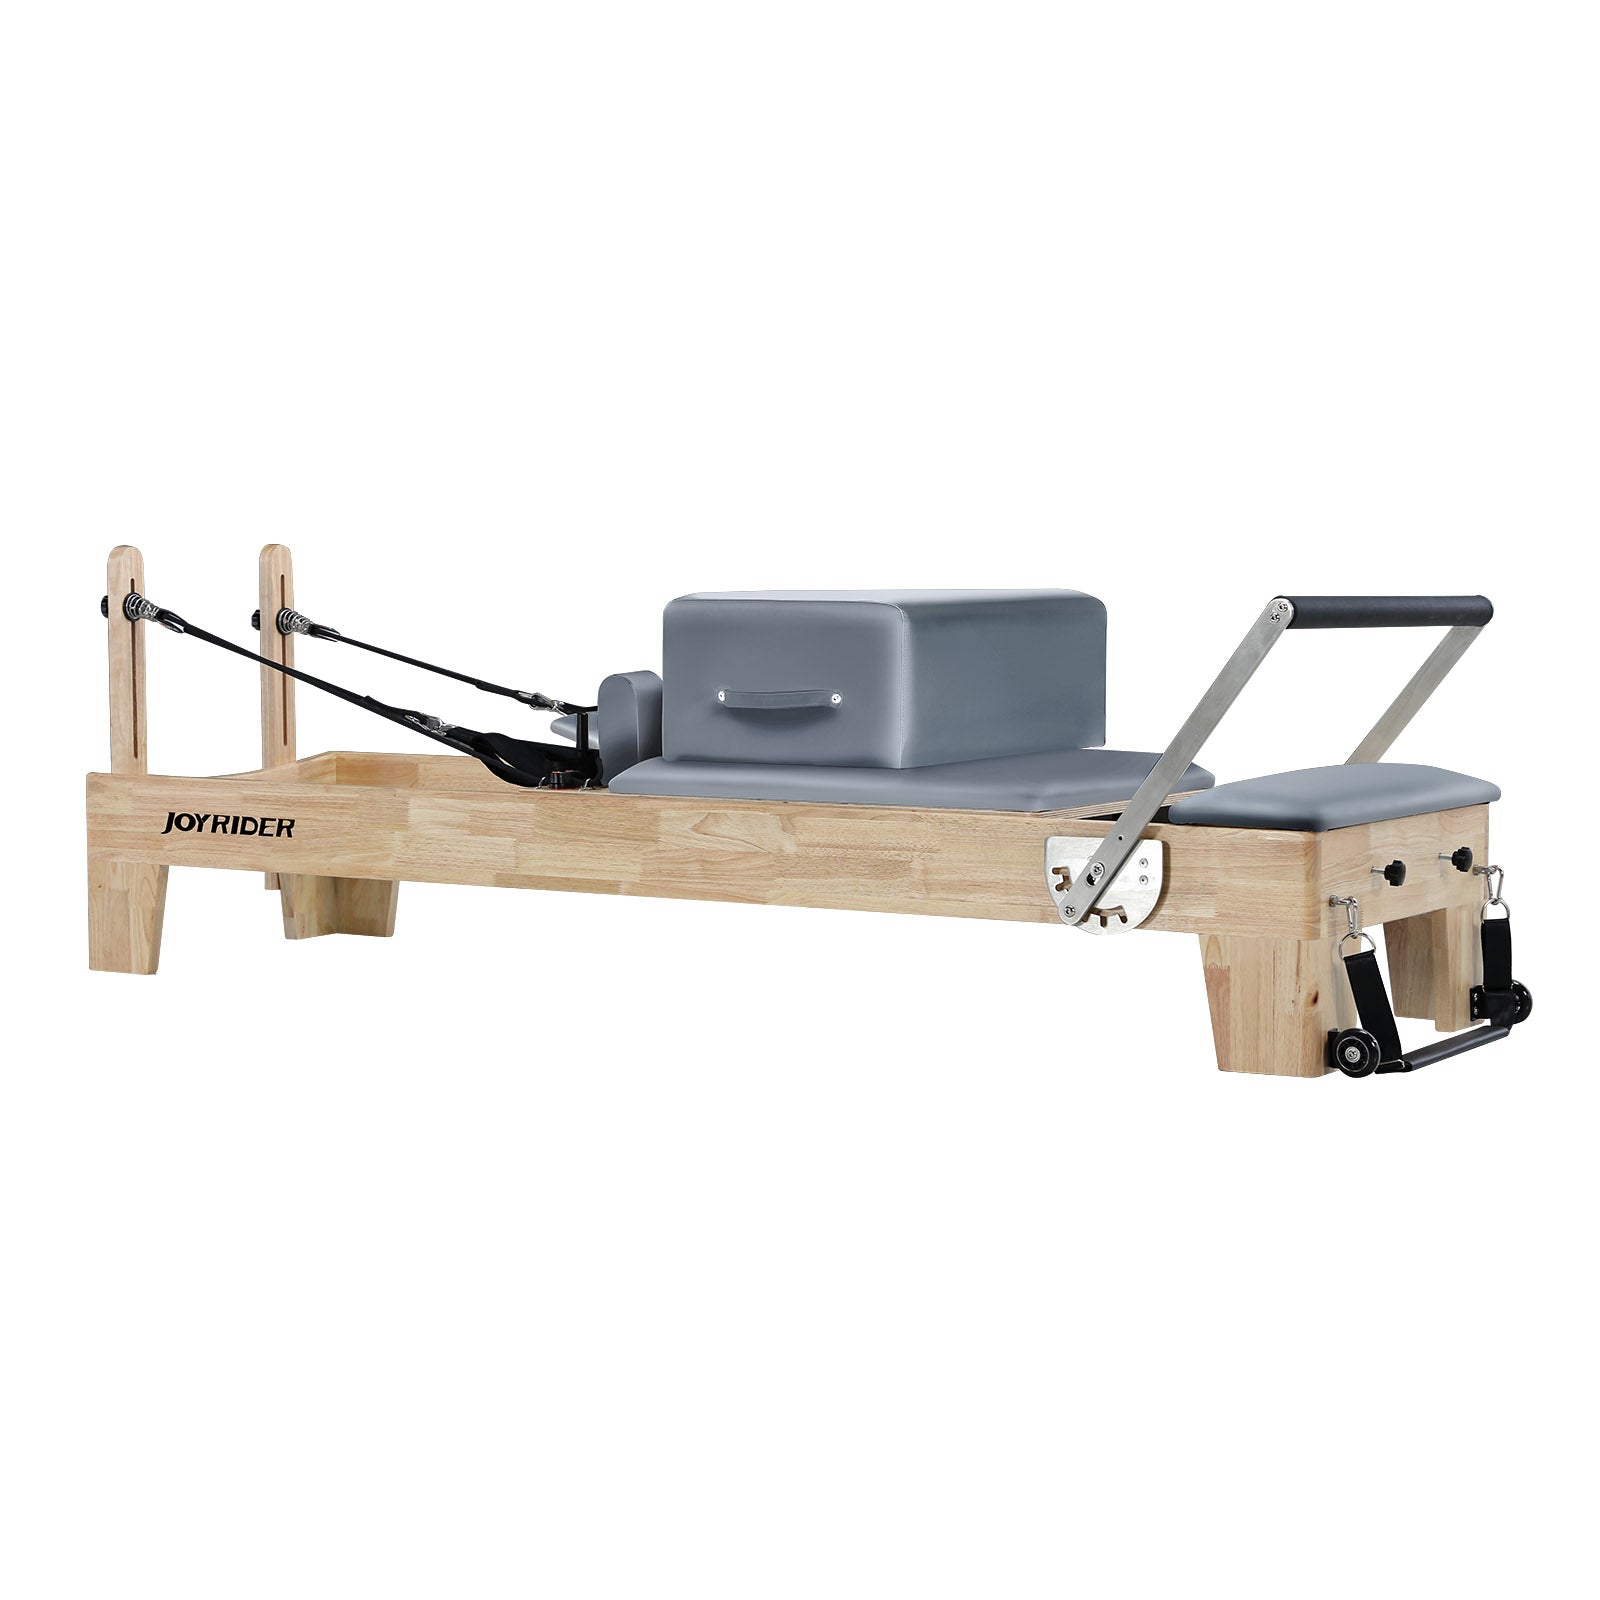 JOYRIDER Pilates Reformer(Available In US only)